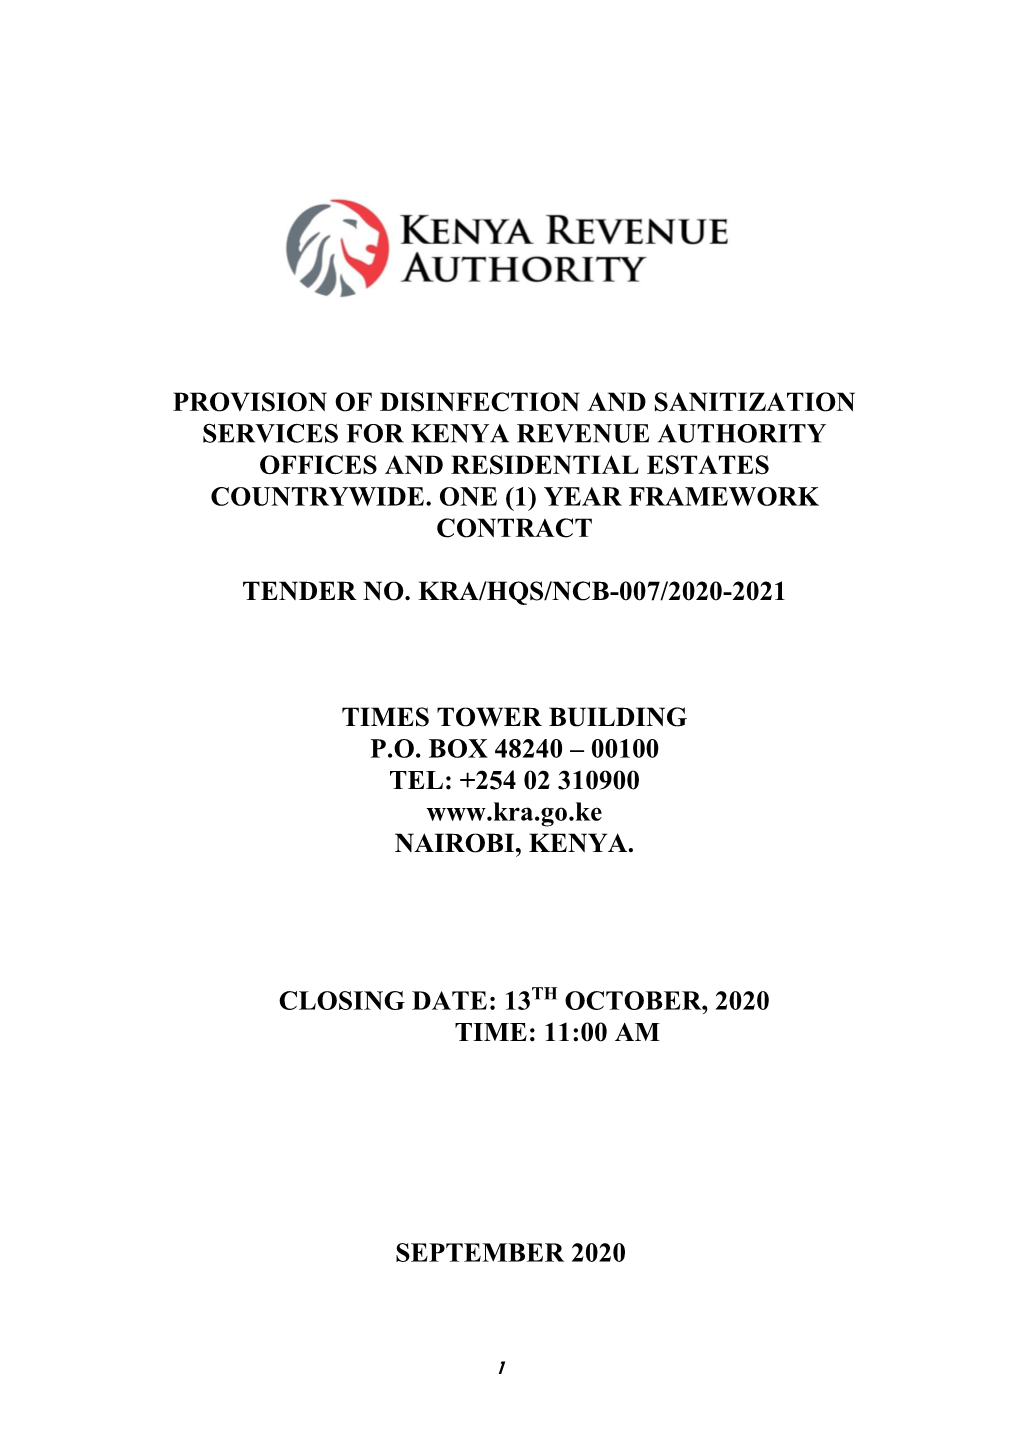 Provision of Disinfection and Sanitization Services for Kenya Revenue Authority Offices and Residential Estates Countrywide